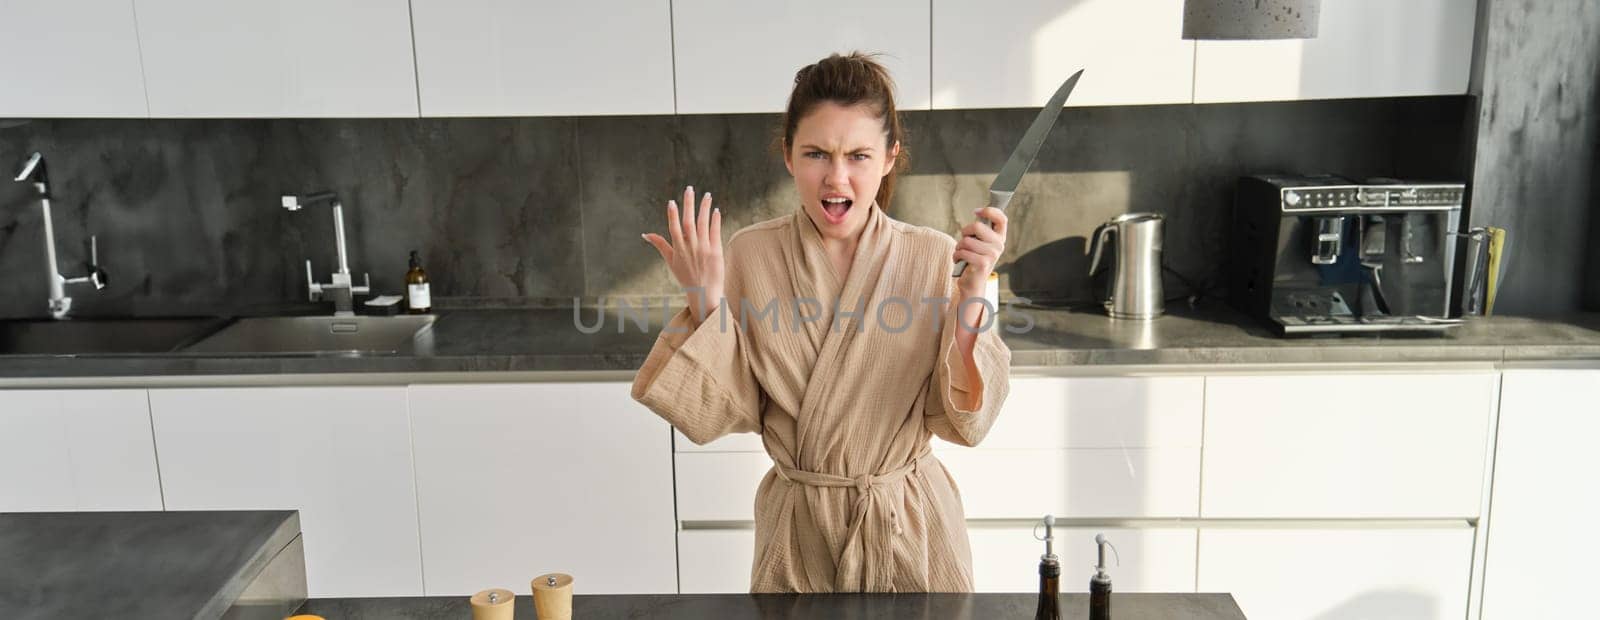 Portrait of annoyed woman with knife, angry while cooking in the kitchen, frustrated while doing house chores and preparing food for family,standing in bathrobe.